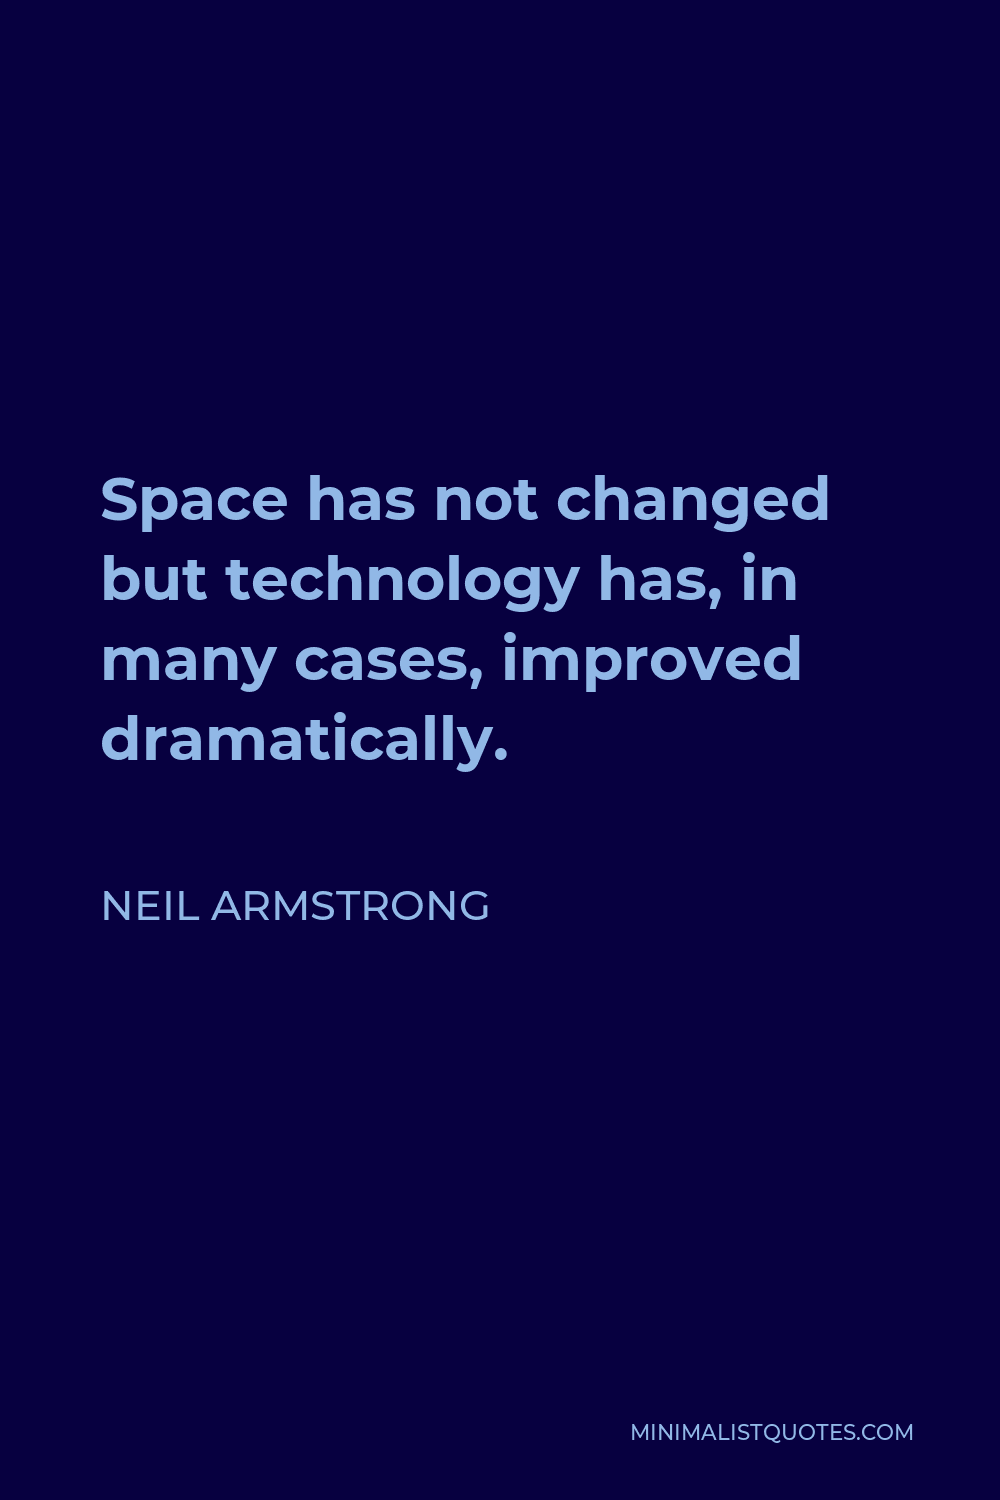 Neil Armstrong Quote - Space has not changed but technology has, in many cases, improved dramatically.